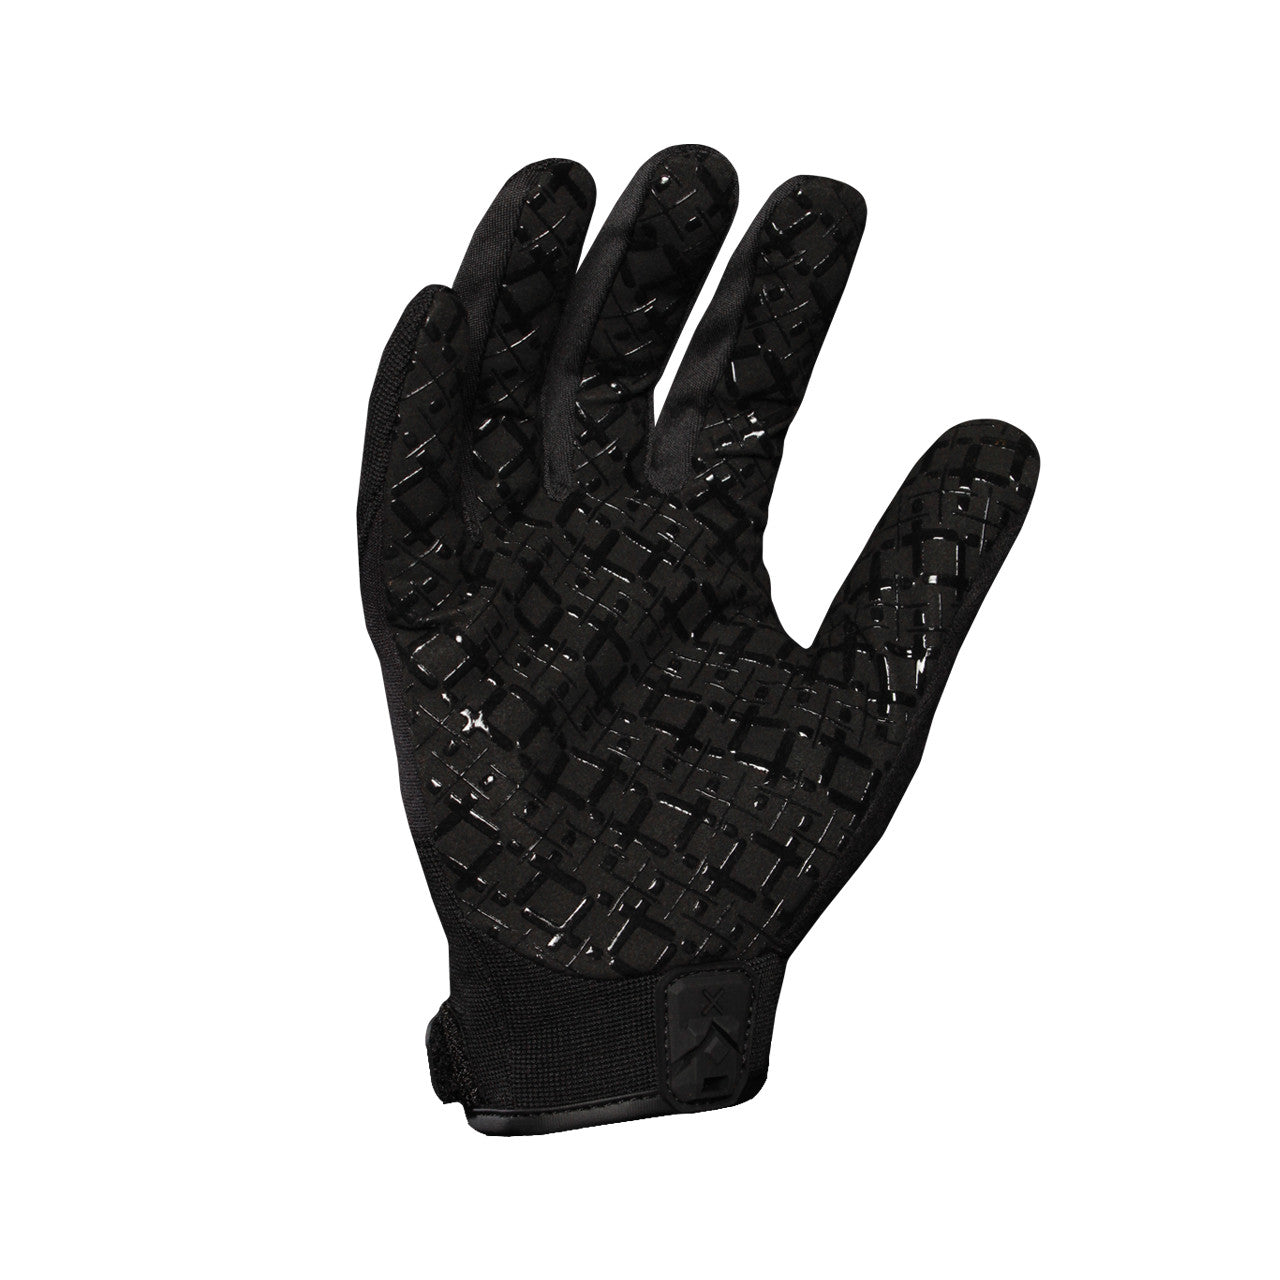 Ironclad EXO™ Tactical Operator Grip Glove Black-eSafety Supplies, Inc